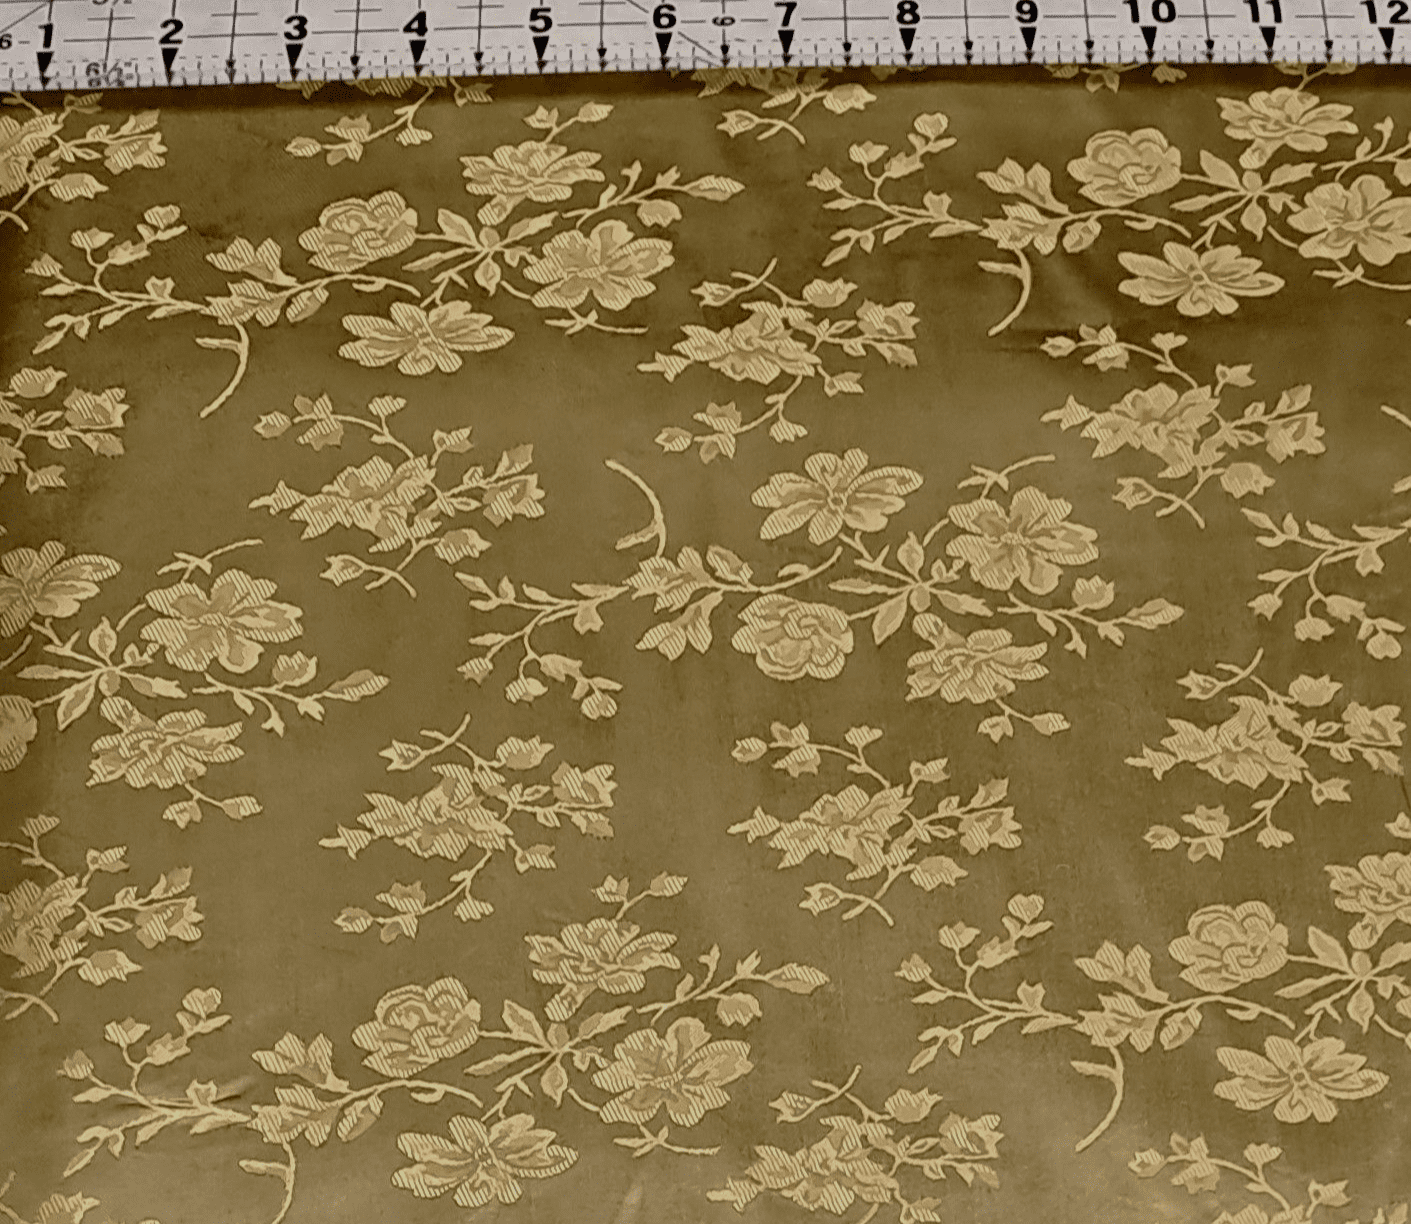 Luxury Viscose Lining - Golden Floral Lustre 60" Wide Fabric